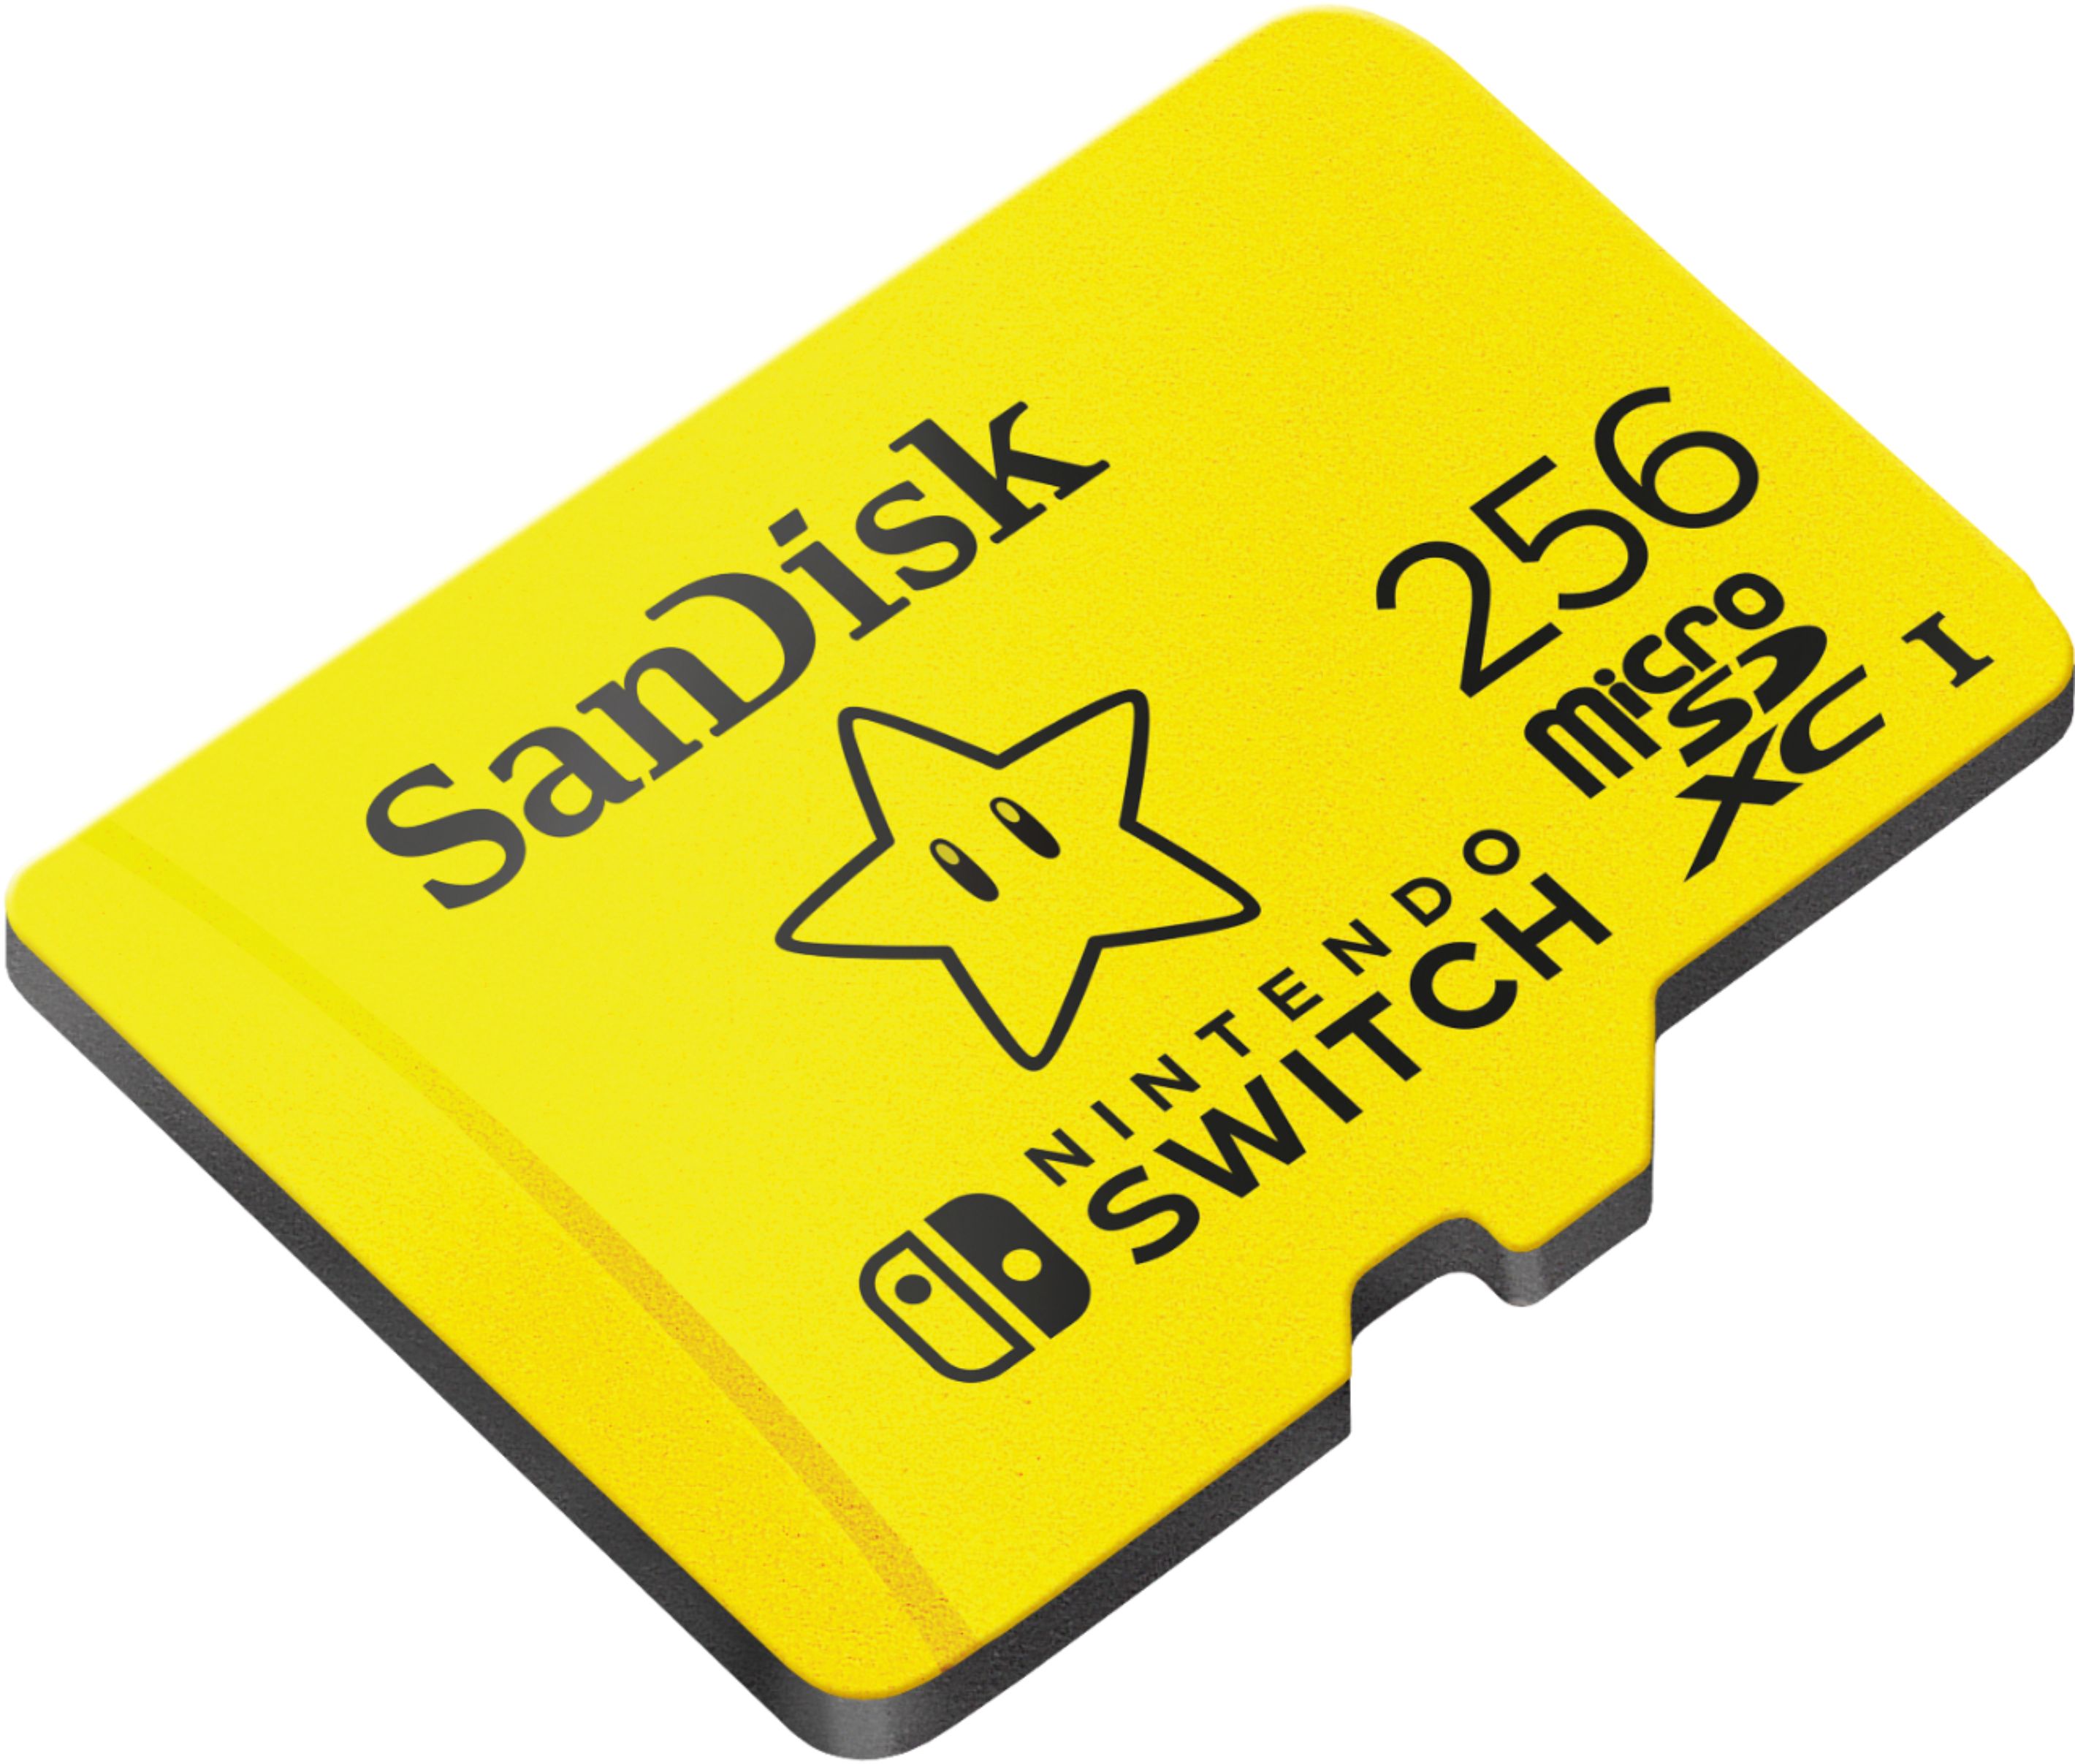 How do you put an sd card in a switch Sandisk 256gb Microsdxc Uhs I Memory Card For Nintendo Switch Sdsqxao 256g Anczn Best Buy